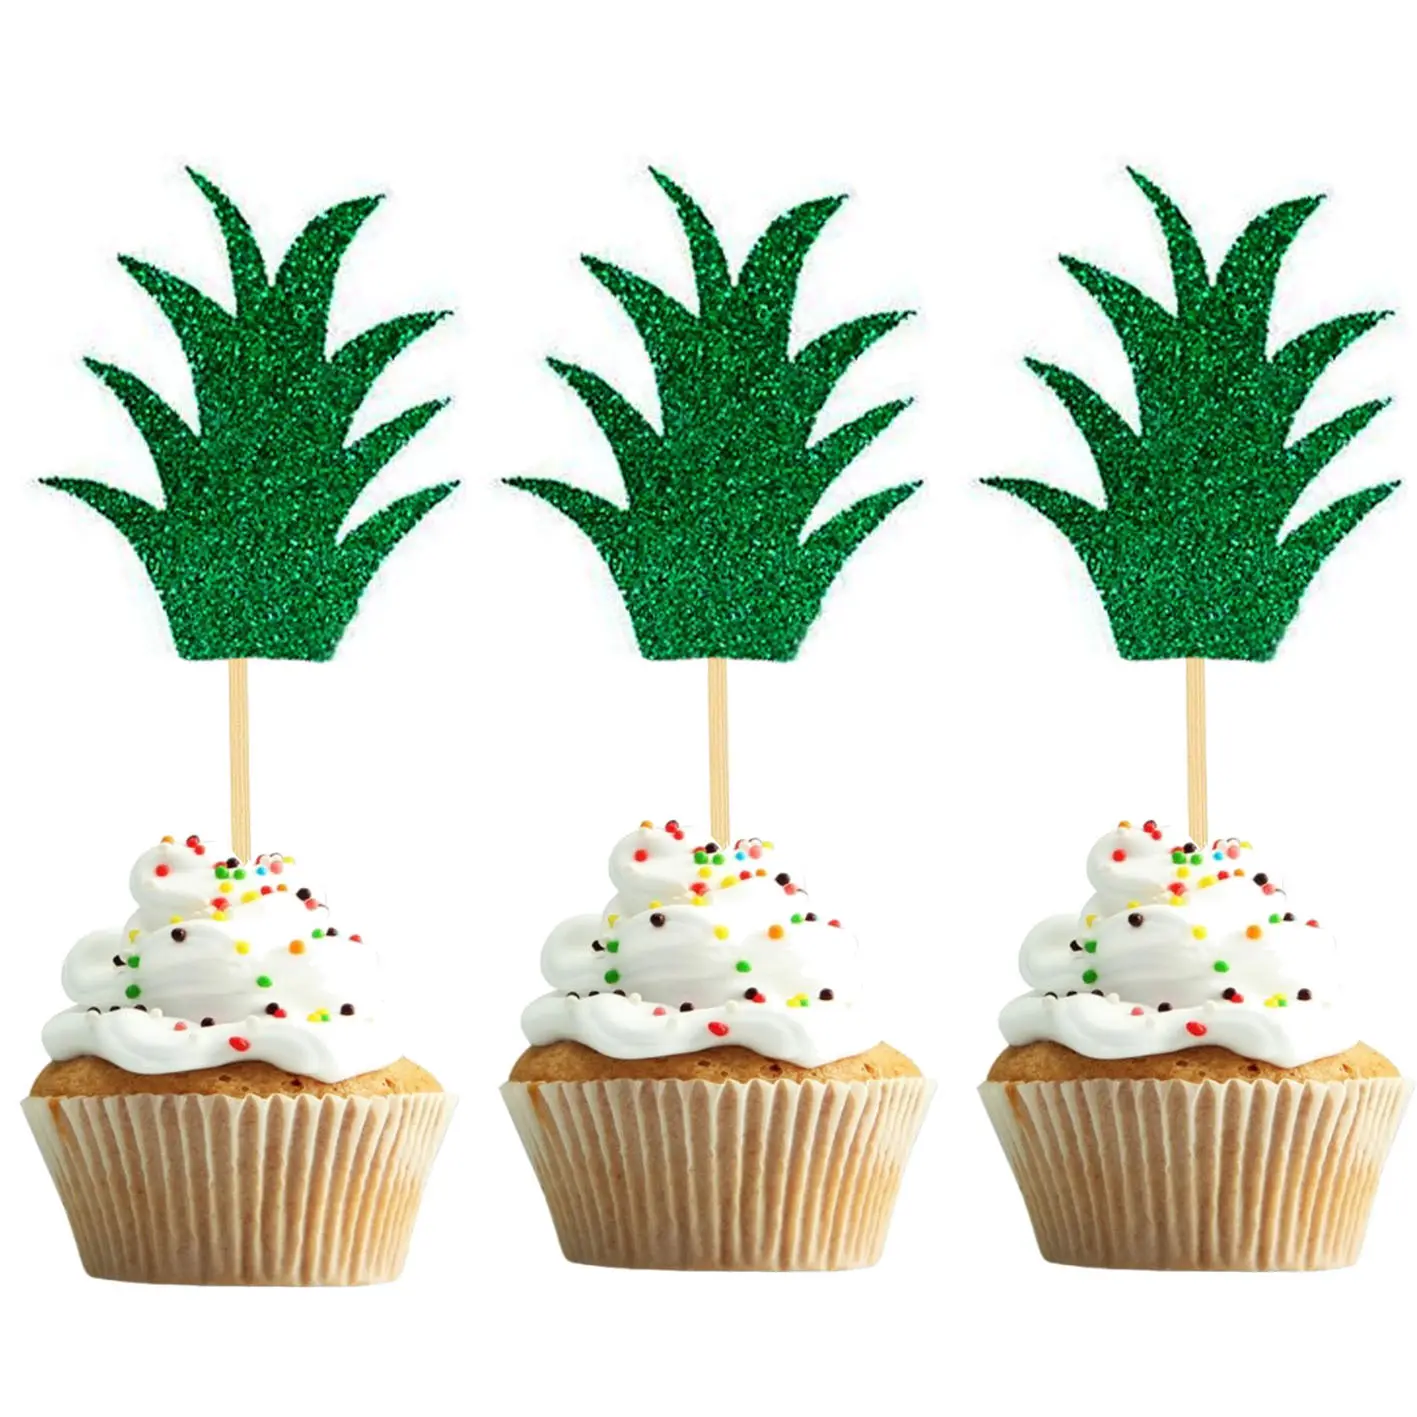 Ychon Pineapple leaf Topper Cake Picks Hawaiian Summer Tropical Party Cupcake Topper Decorations Themed Baby Shower